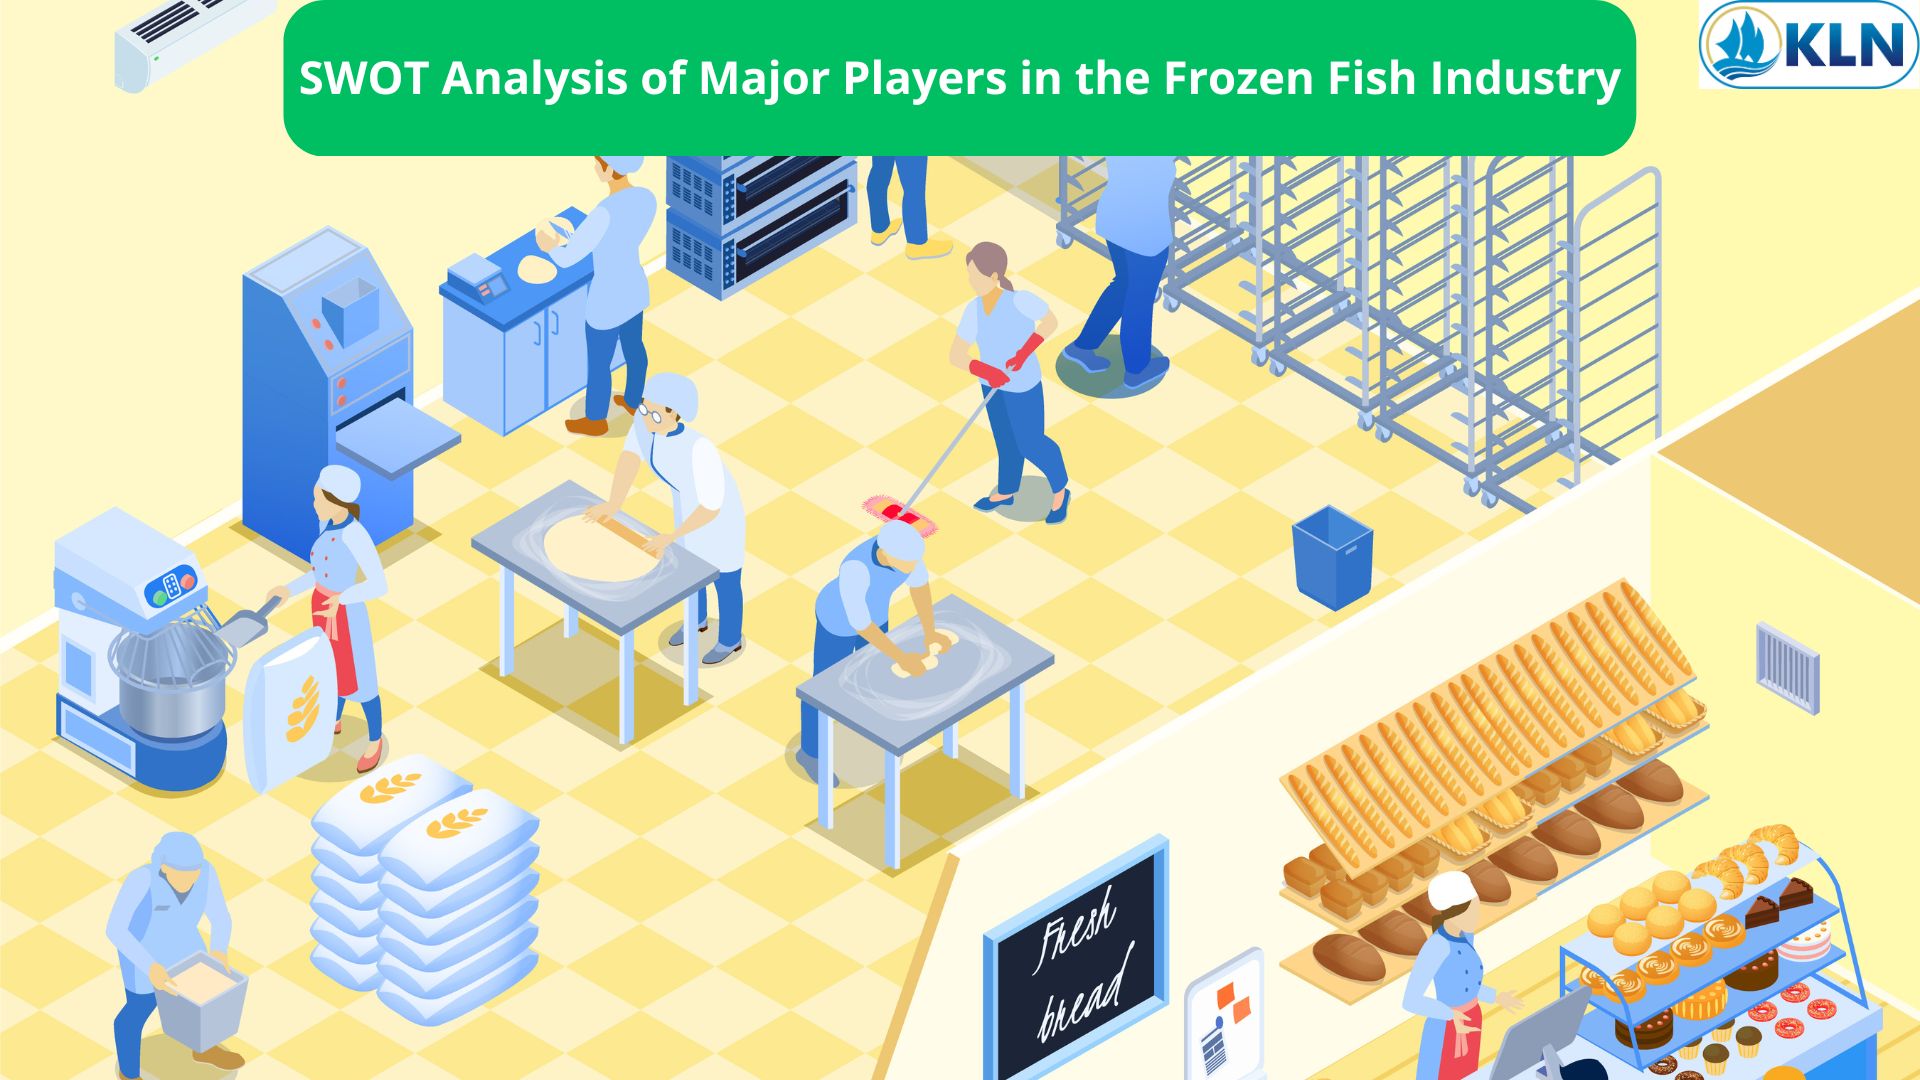 SWOT Analysis of Major Players in the Frozen Fish Industry